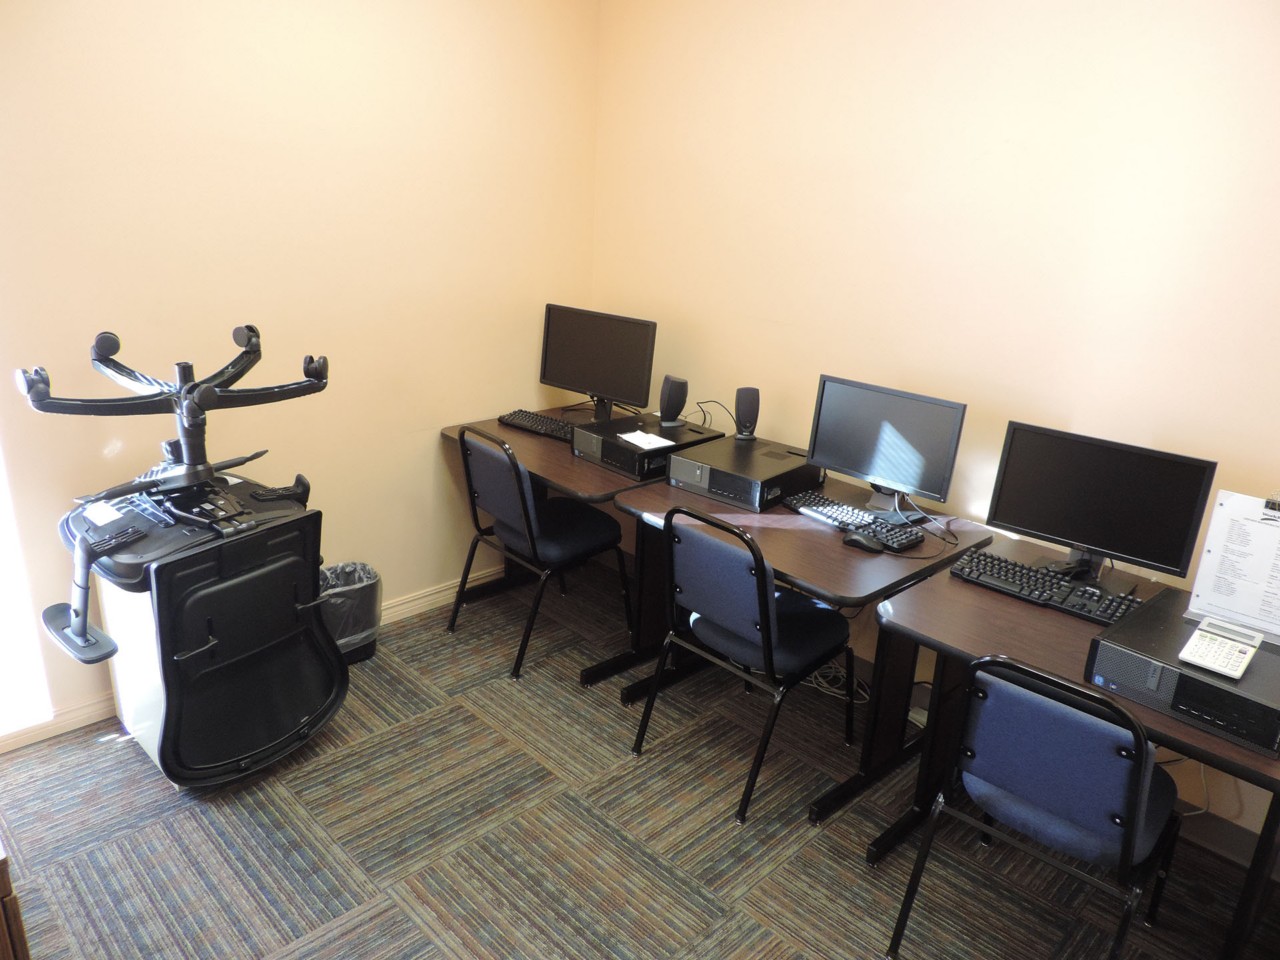 Training or testing room with available computers.